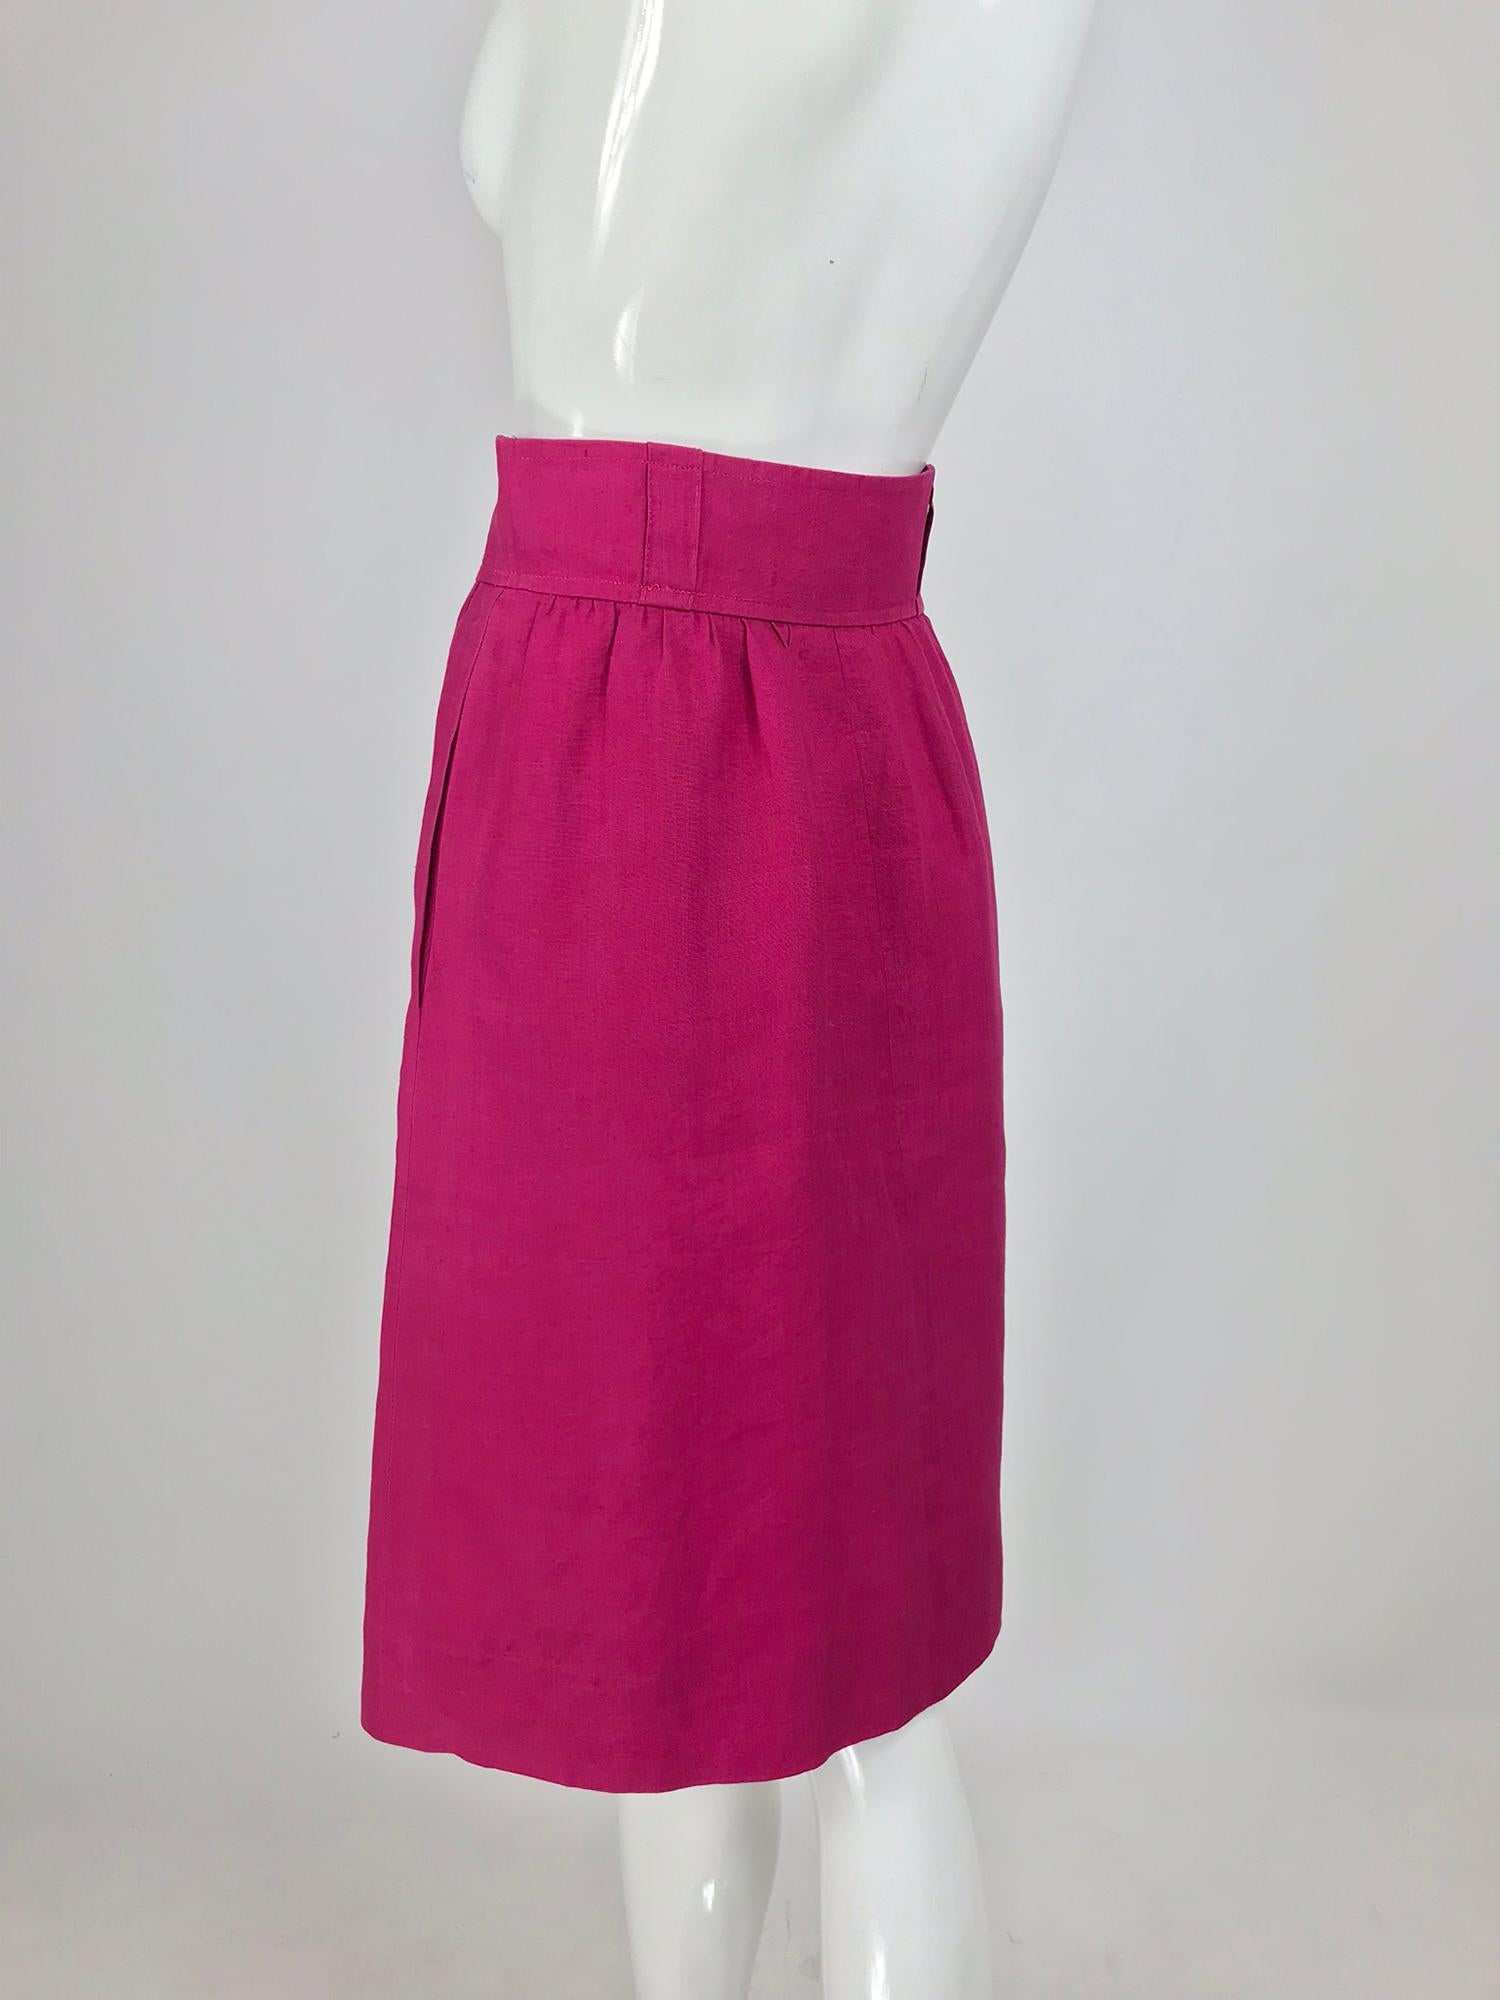 Givenchy Hot Pink Linen Skirt 1980s 4